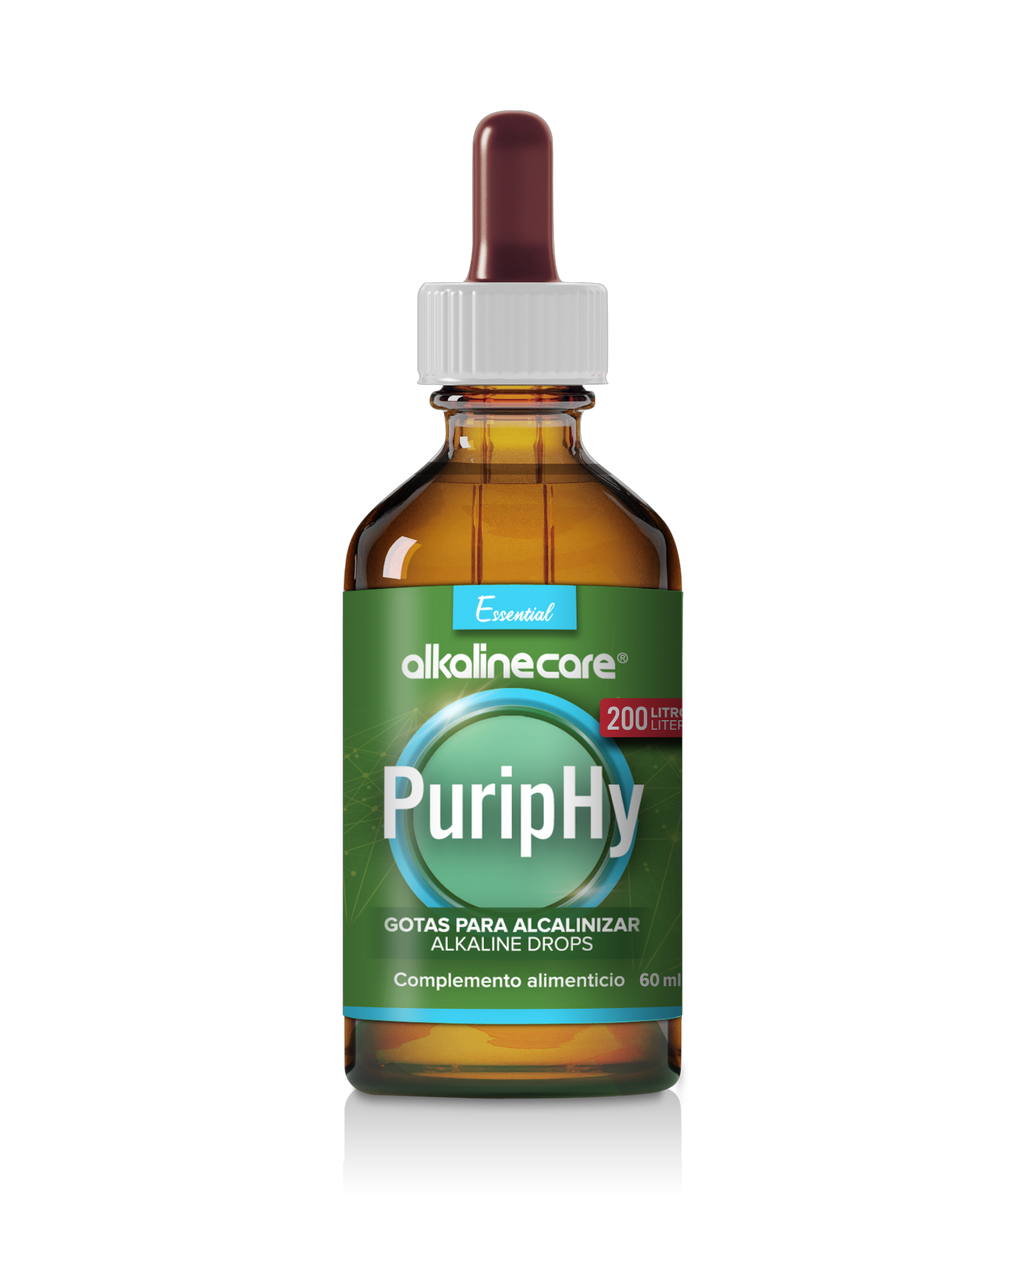 Puriphy (2 oz / 60 ml)